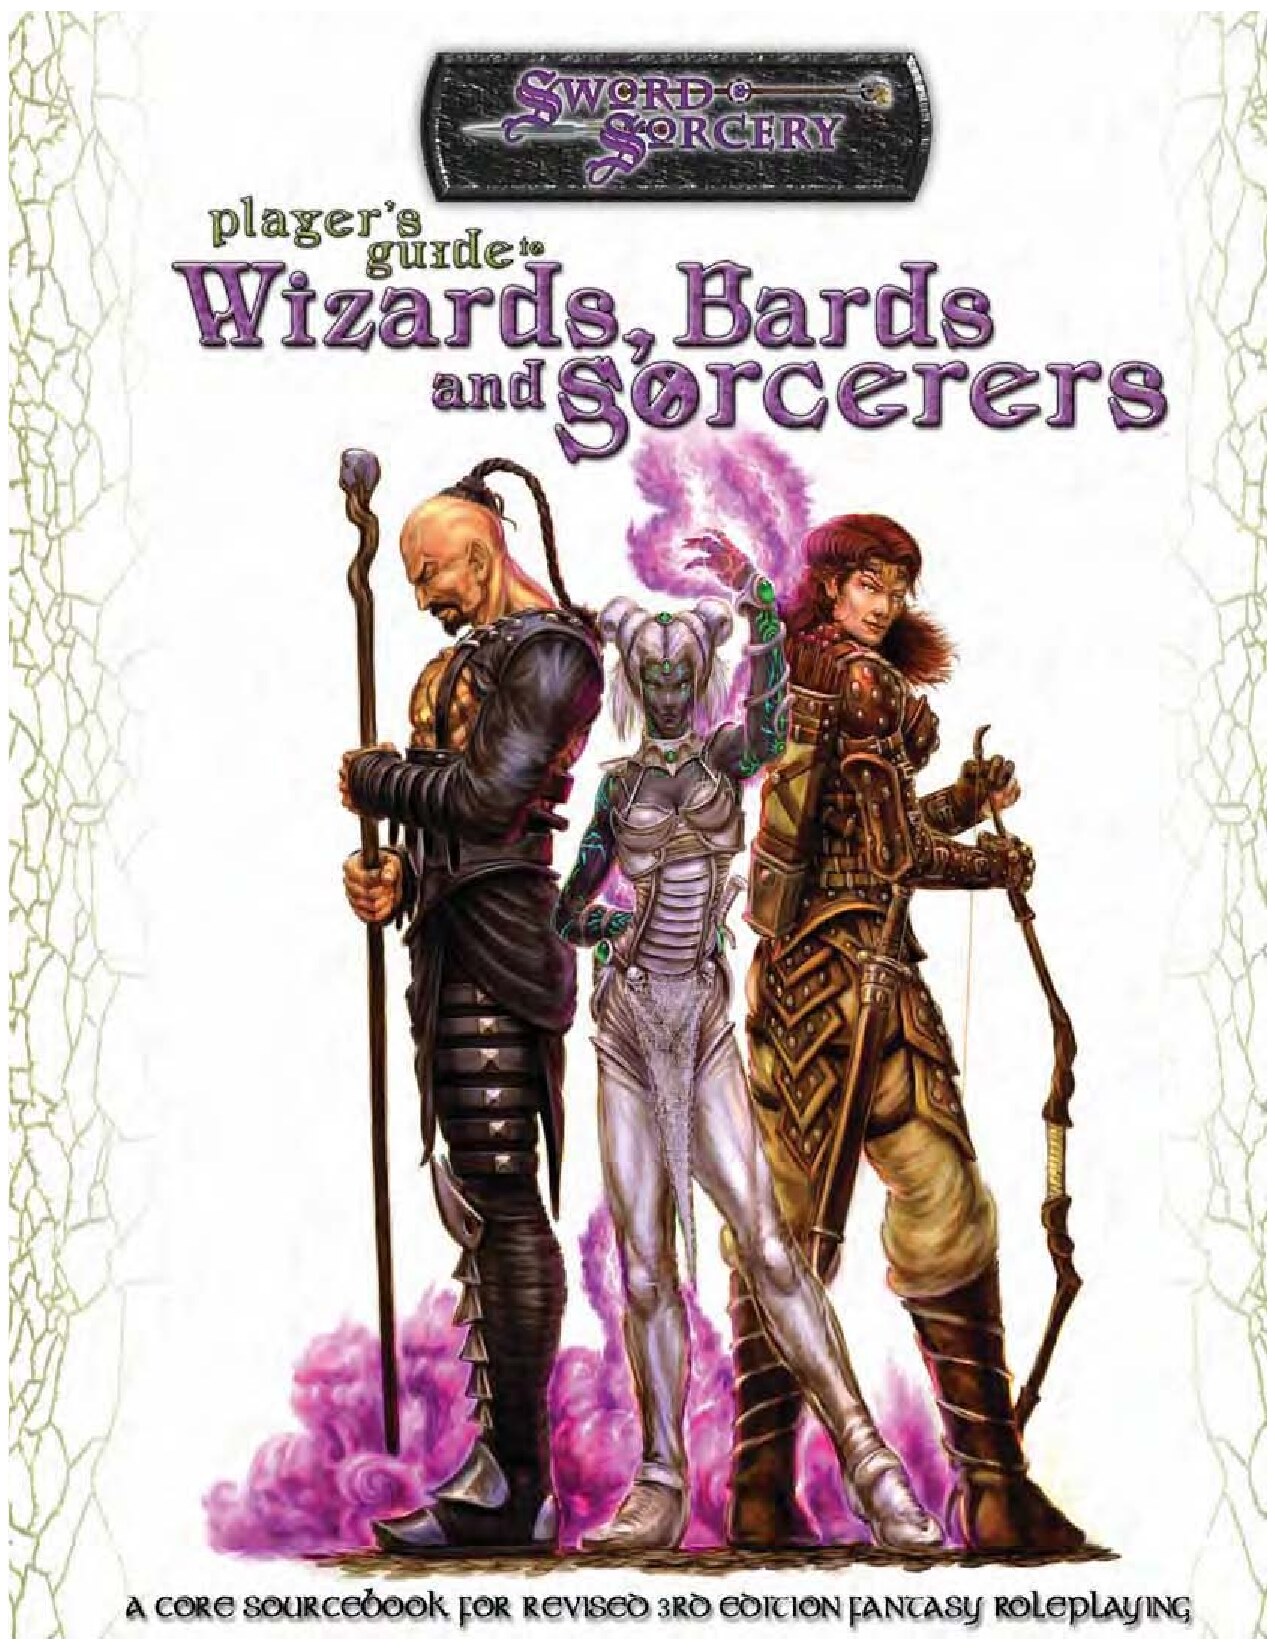 Player's Guide to Wizards, Bards and Sorcerers